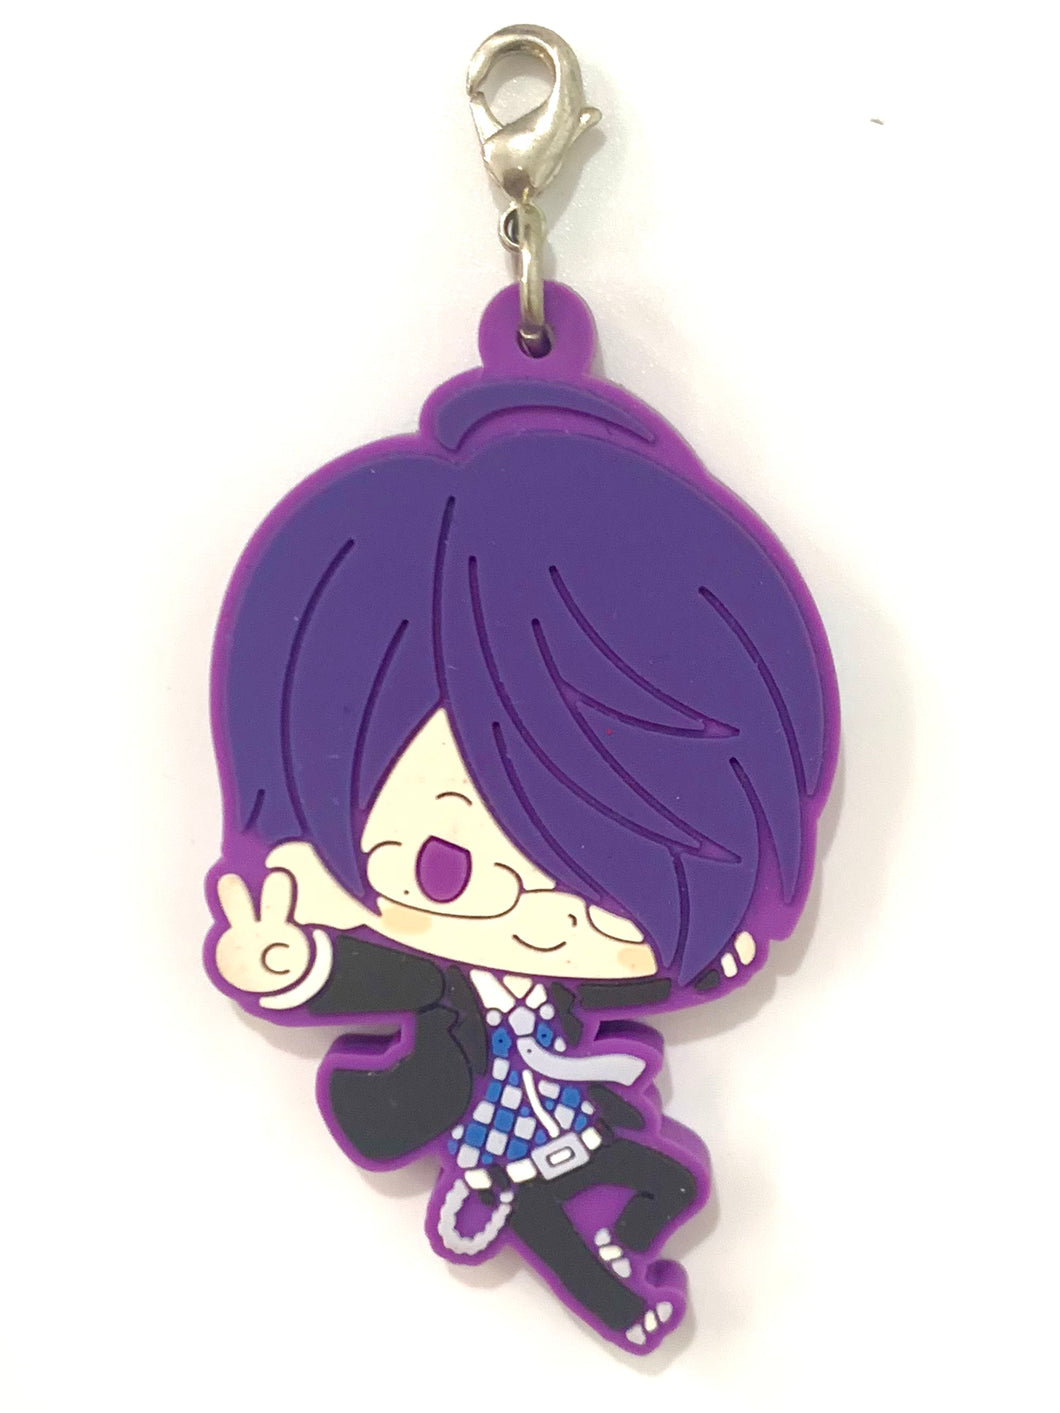 Brothers Conflict - Asahina Azusa - Rubber Strap Collection Side B - es Series nino